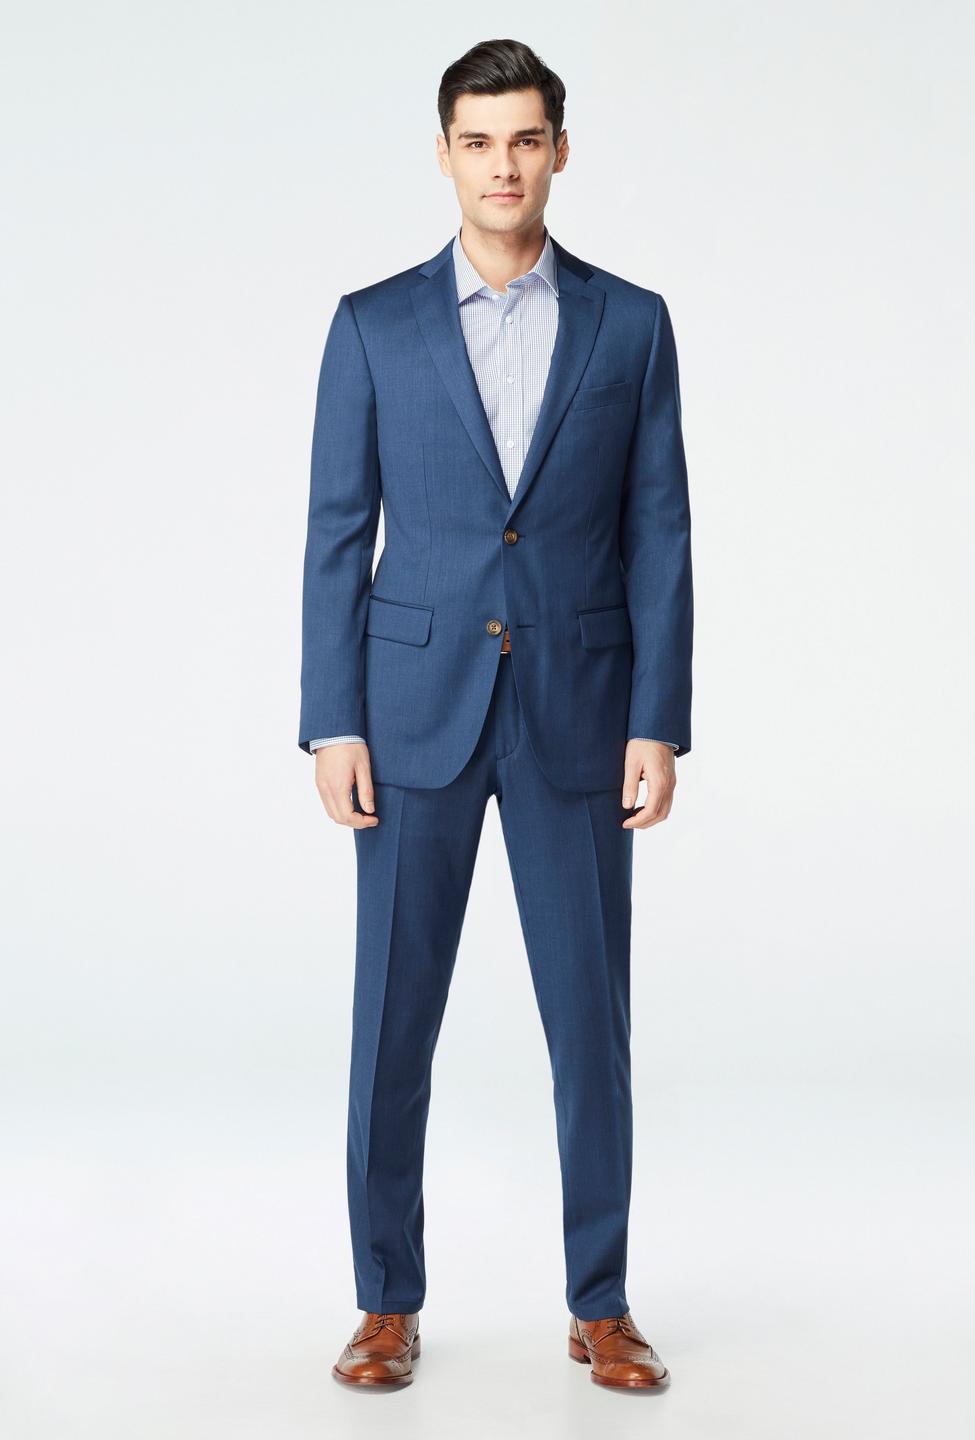 Blue suit - Hemsworth Solid Design from Premium Indochino Collection